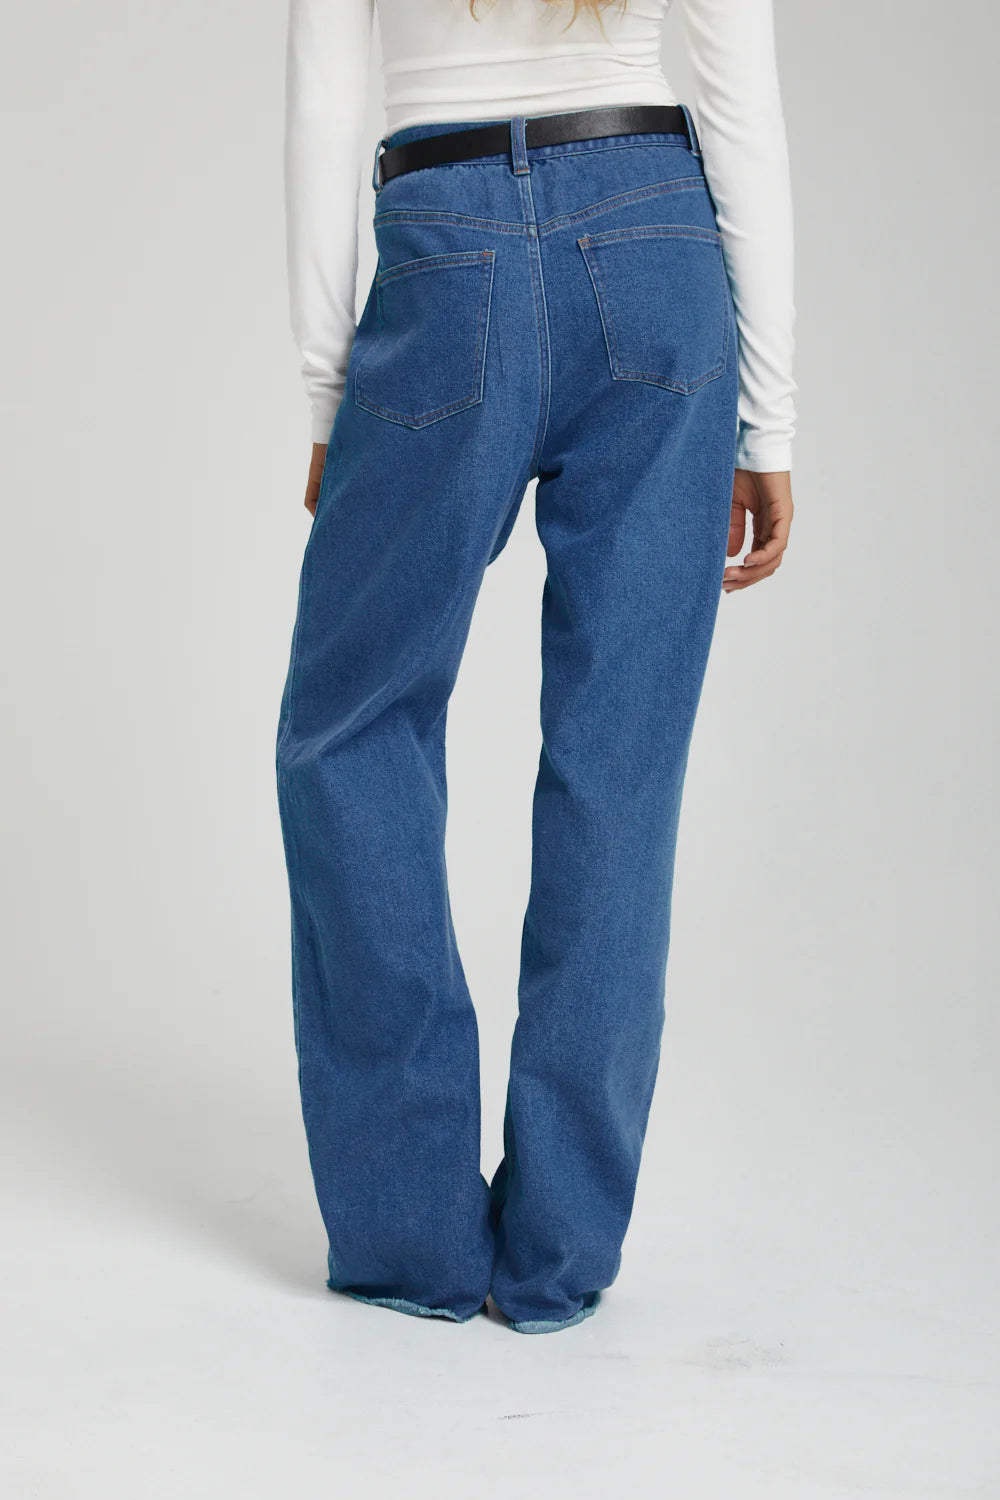 The Easy Jeans Country Denim